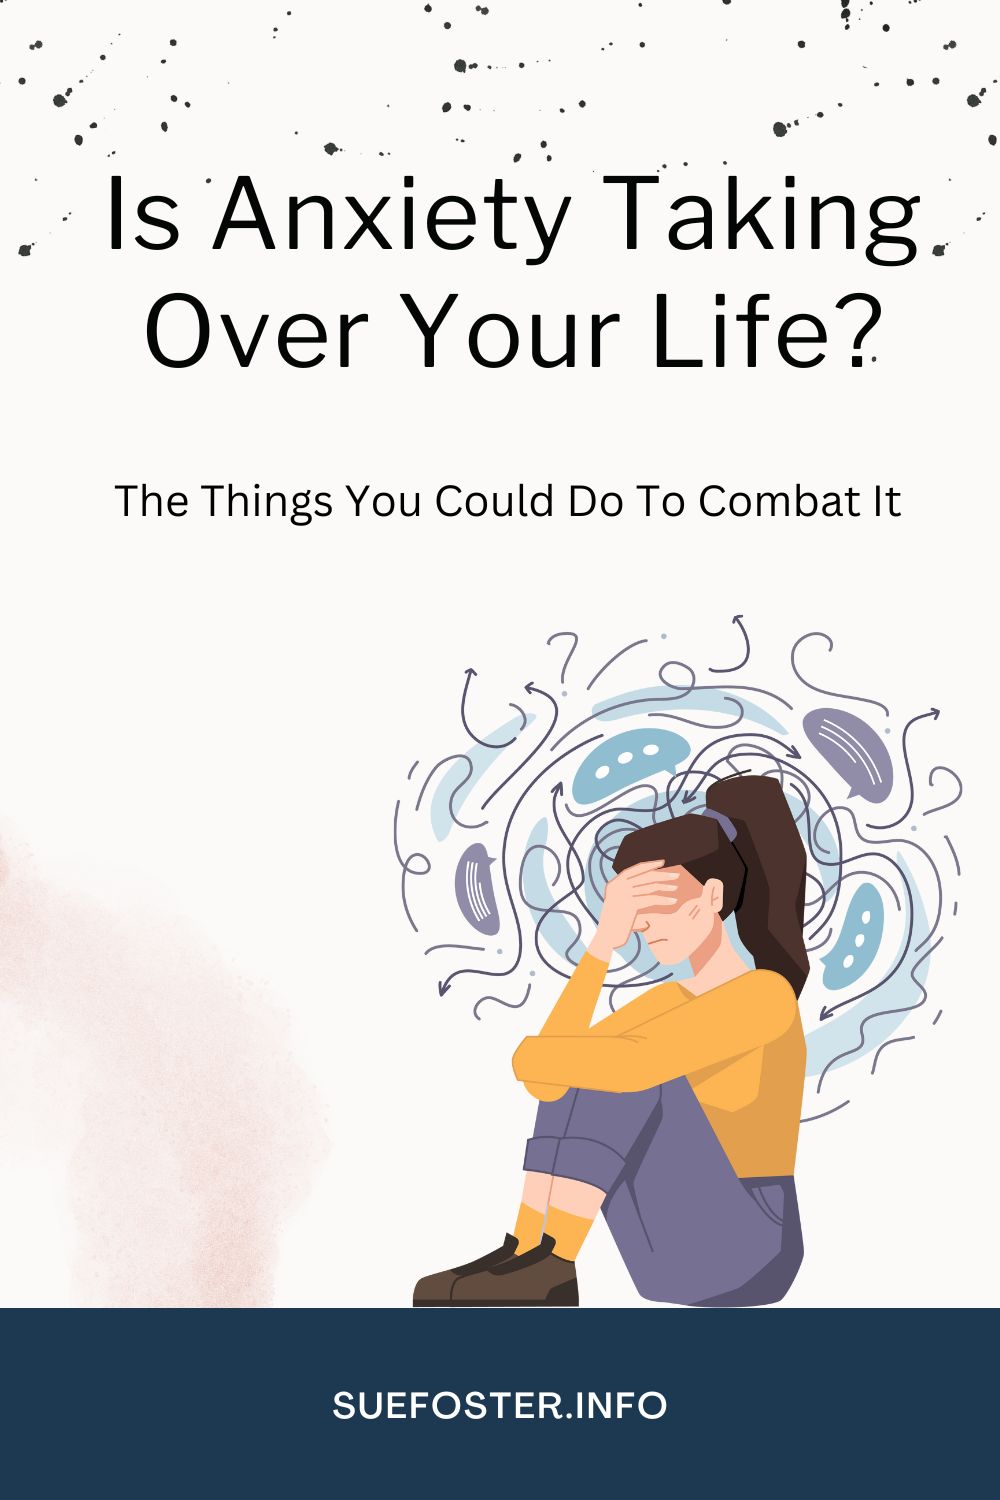 Struggling with anxiety? Learn how to combat it effectively! Discover tips on exercise, essential oils, therapy, and diet adjustments to regain control.